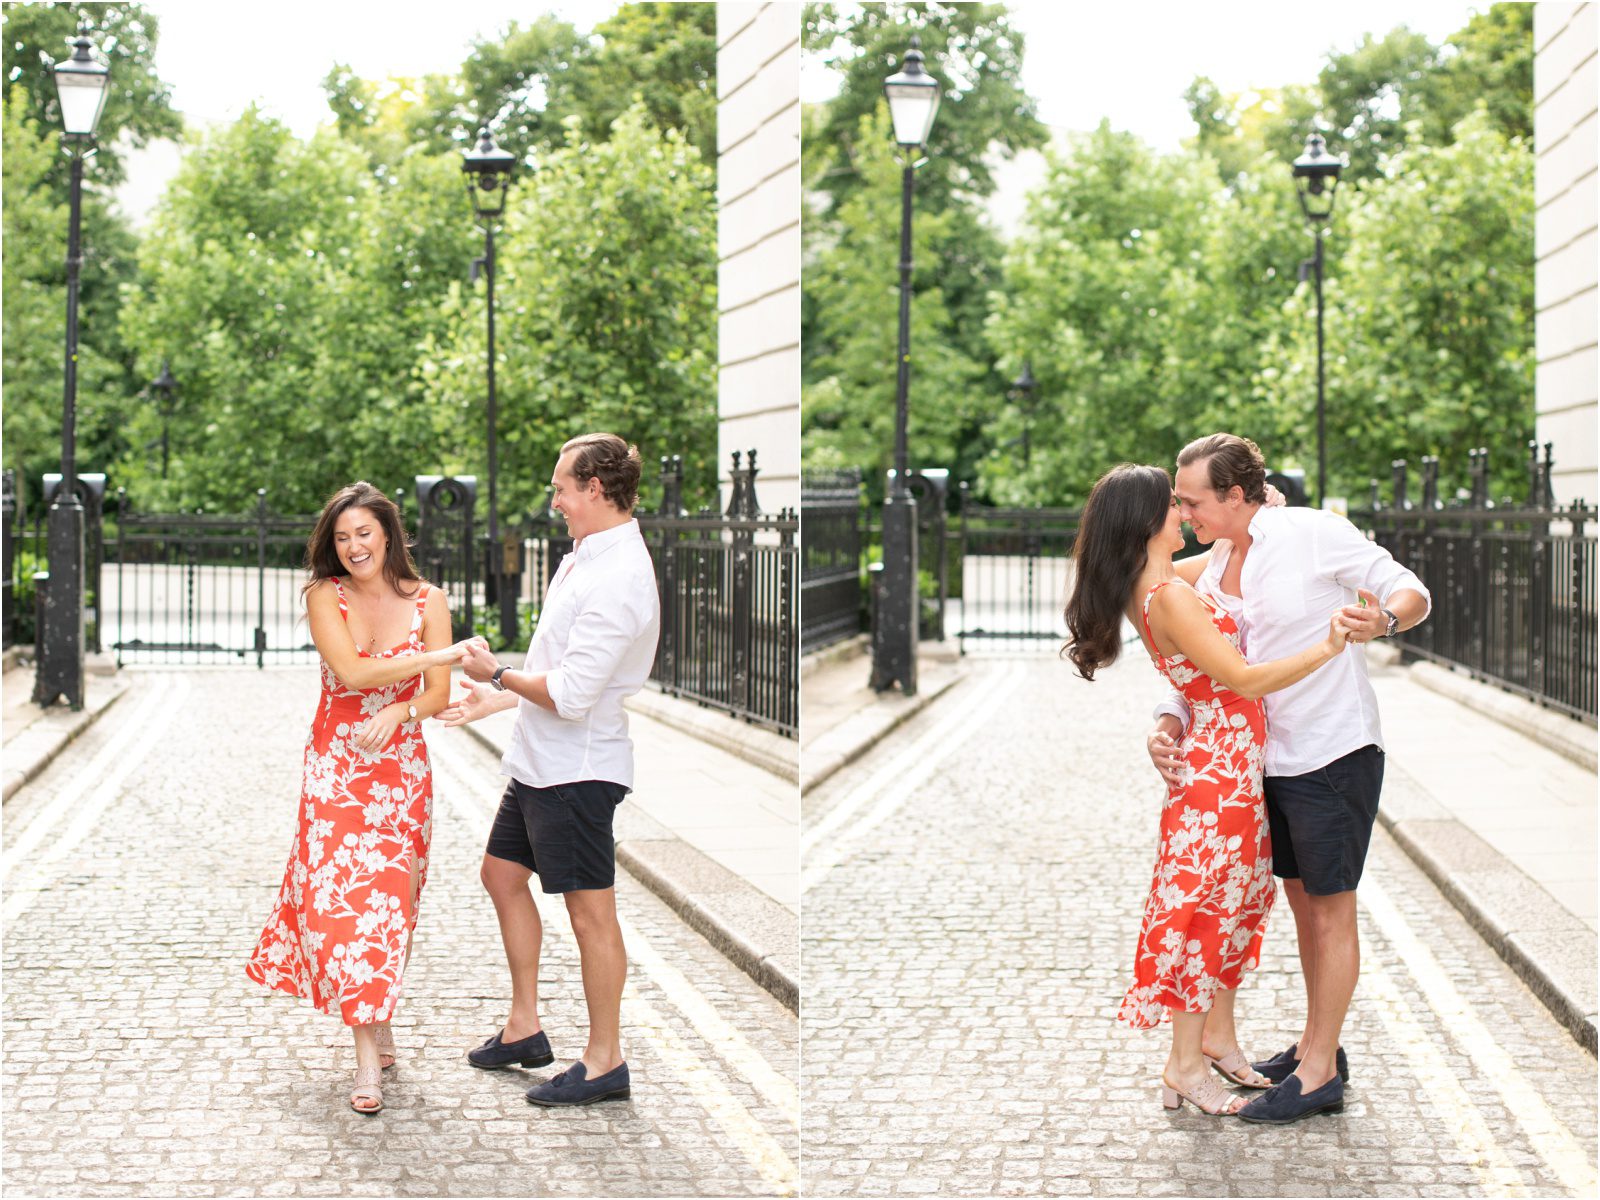 A relaxed engagement photography session in central London